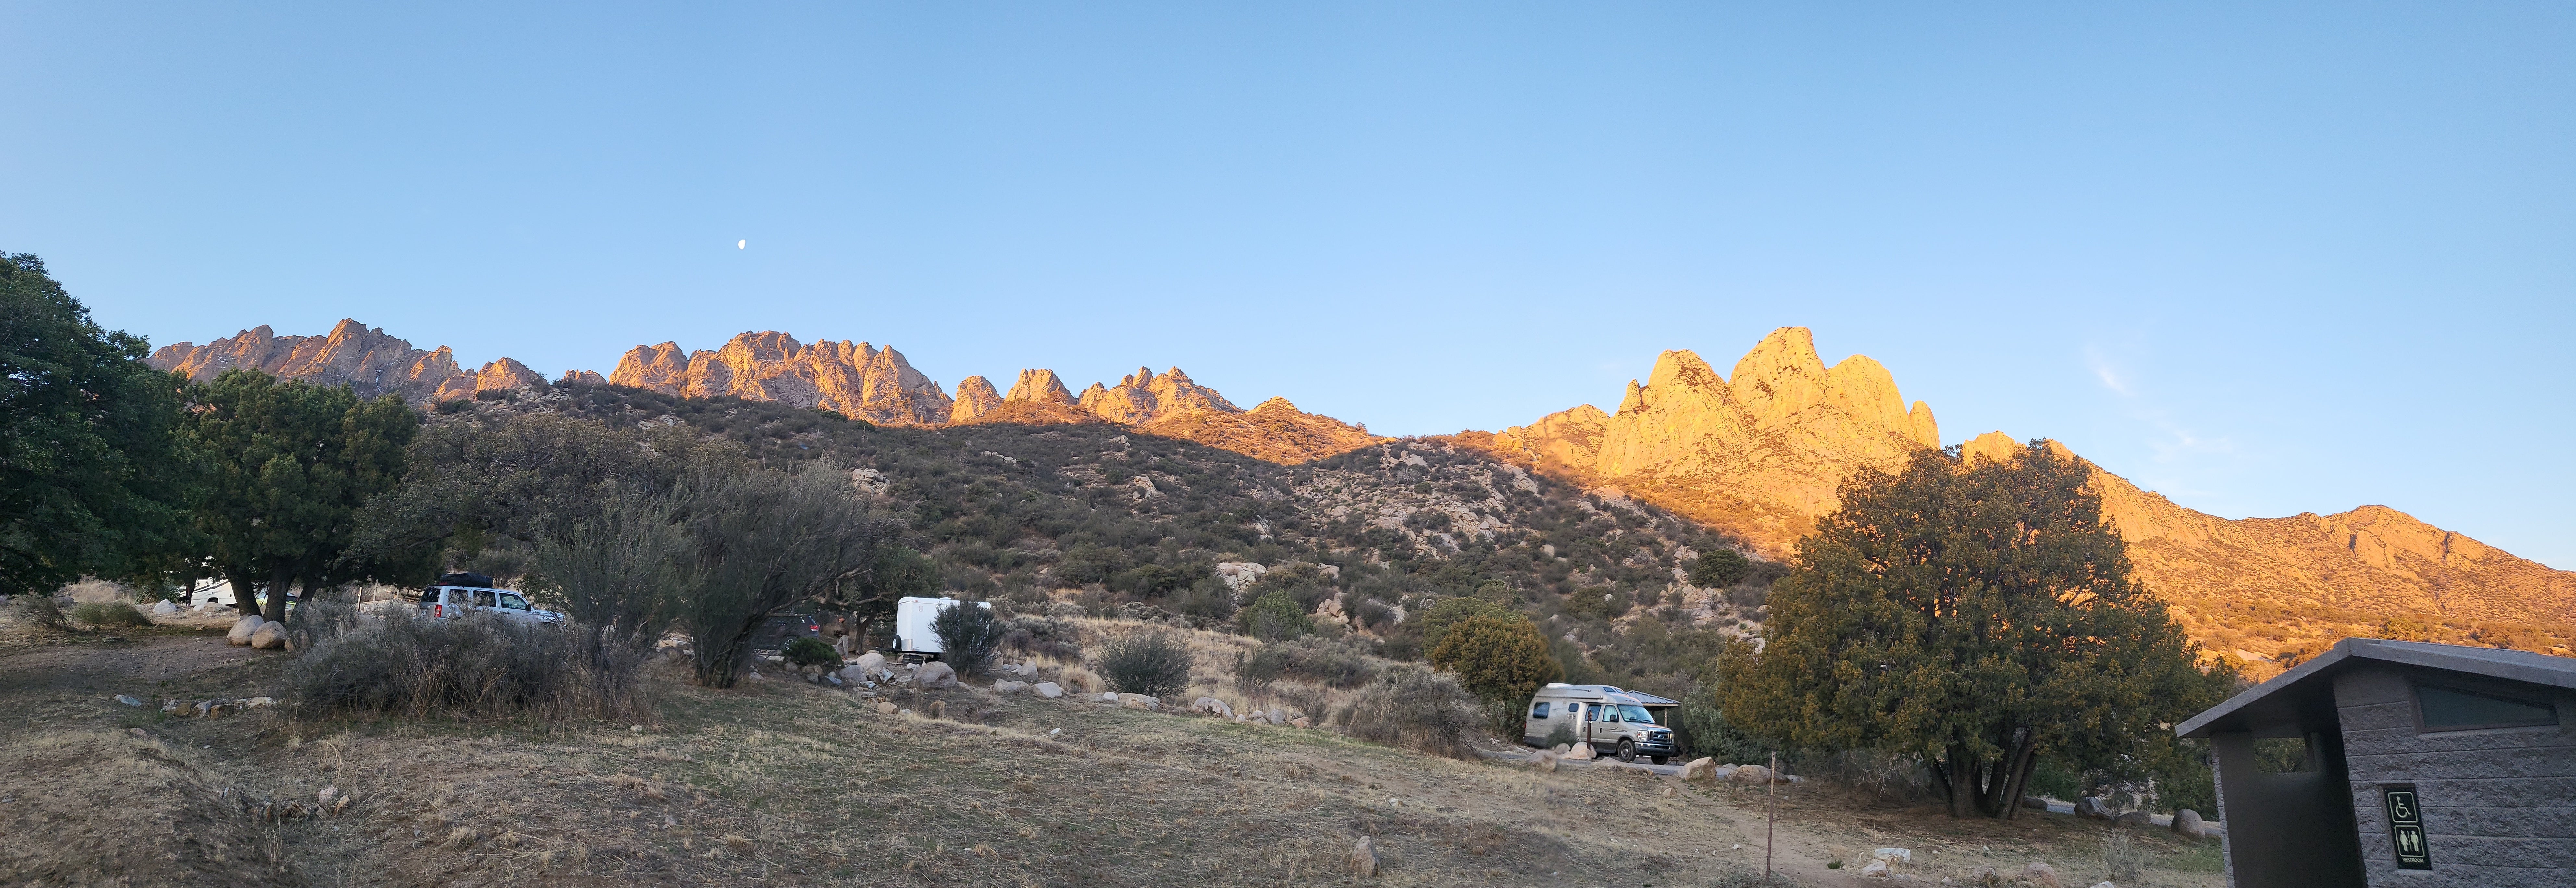 Camper submitted image from Aquirre Springs Campground - 3